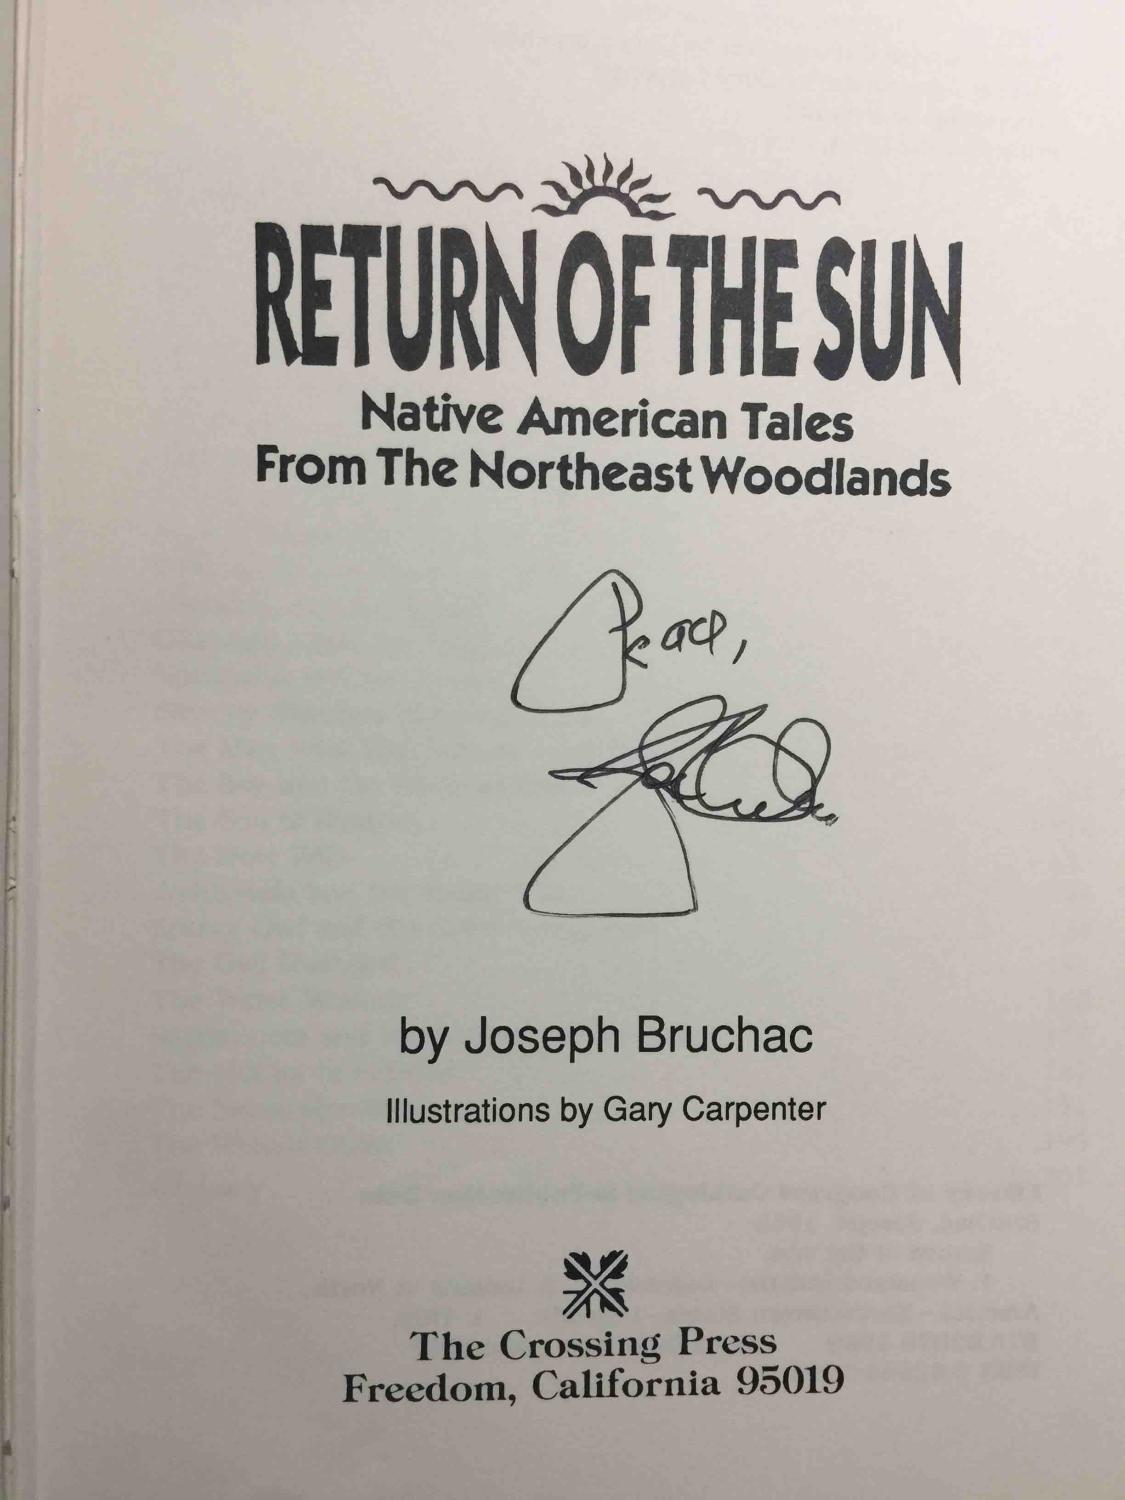 Return of the sun : Native American tales from the Northeast woodlands